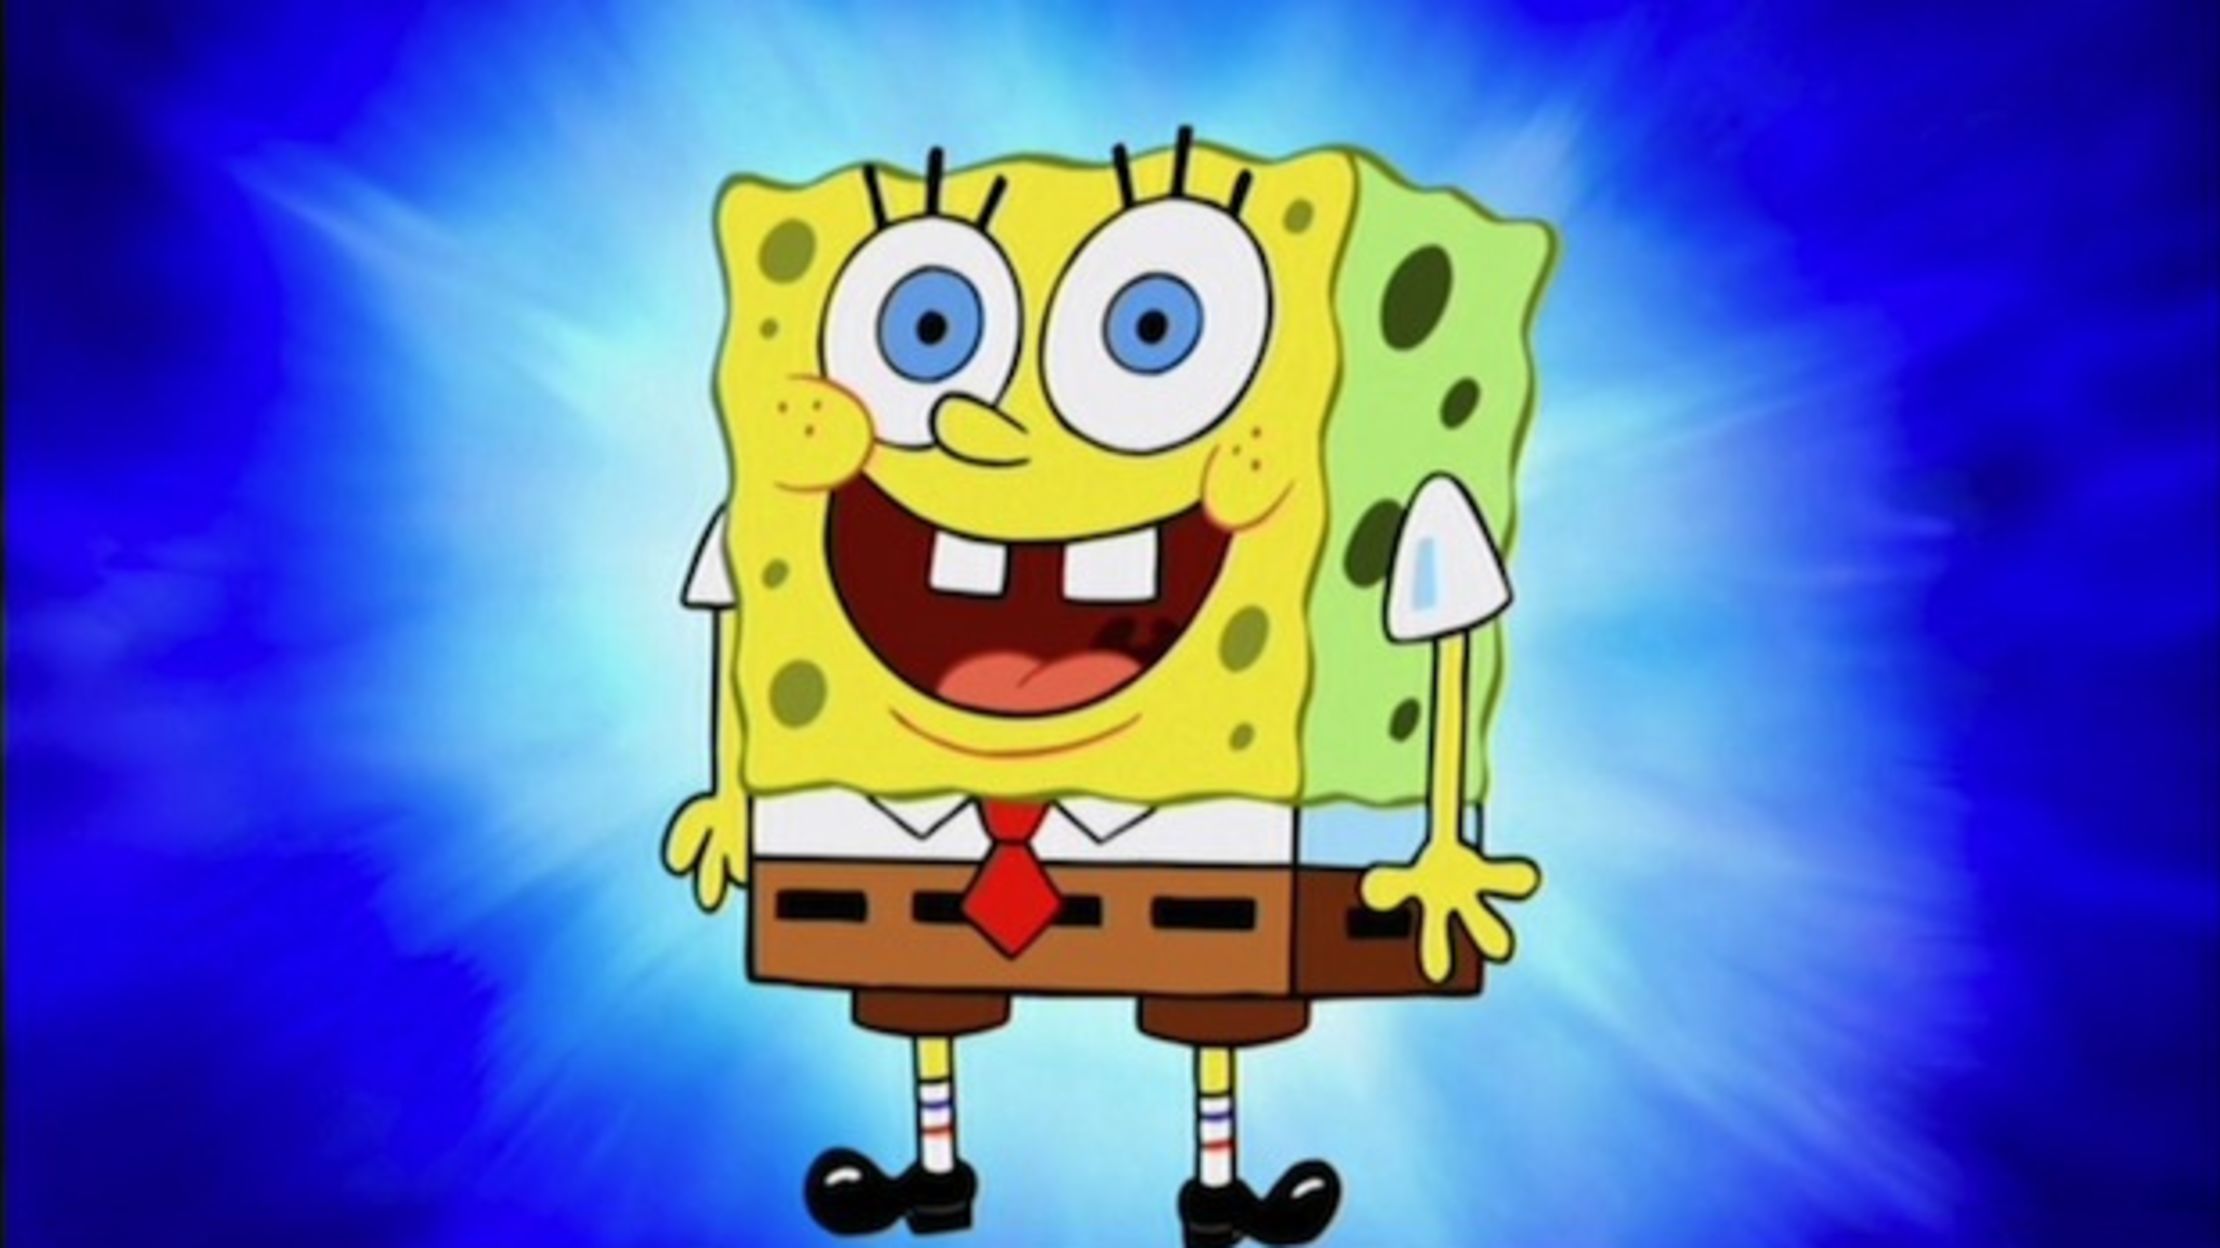 14 Things You May Not Have Known About Spongebob Squarepants